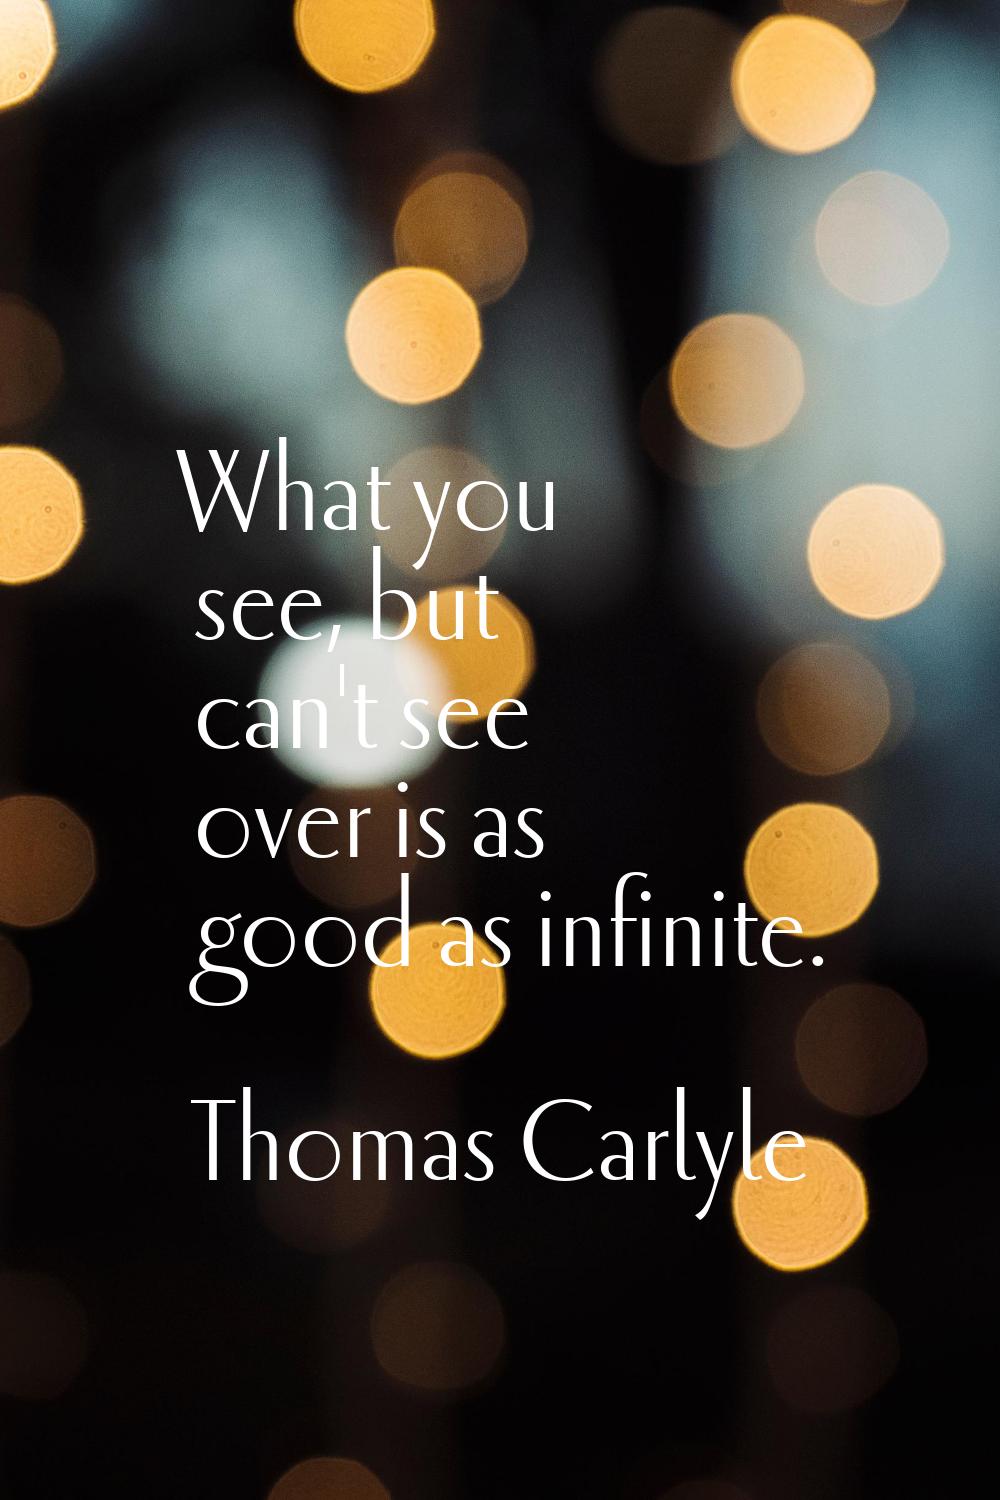 What you see, but can't see over is as good as infinite.